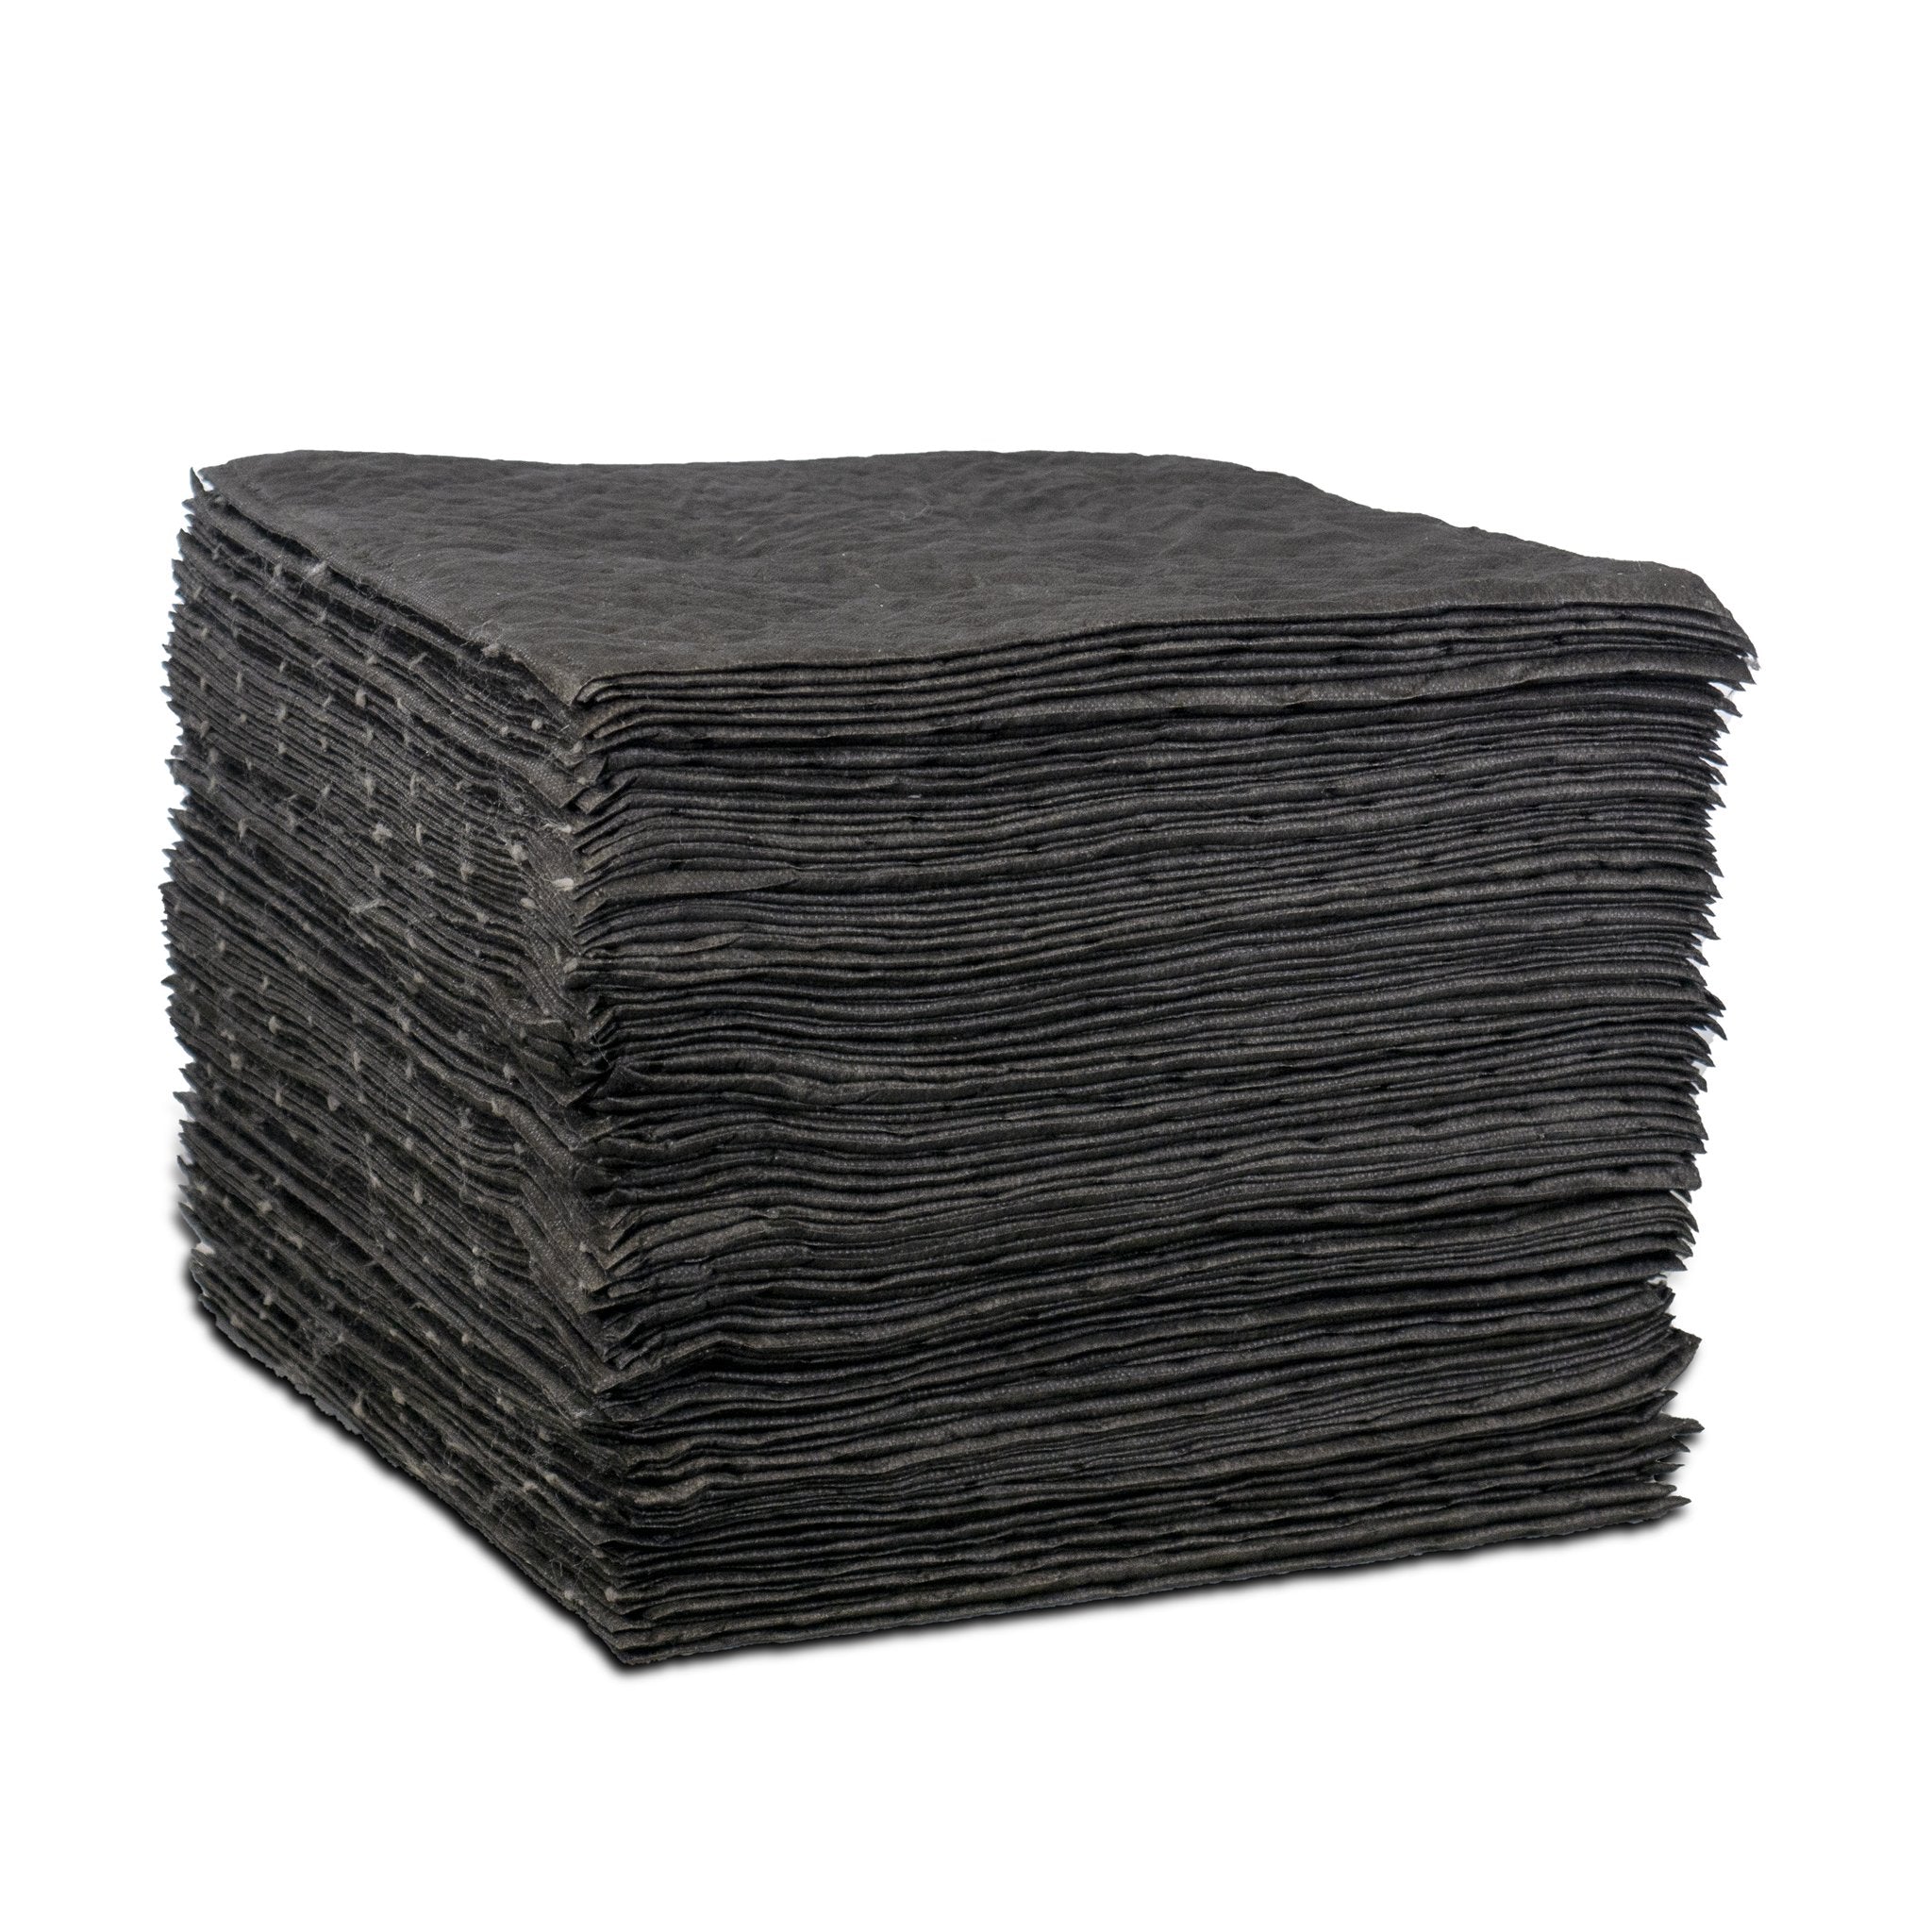 Recycled FiberLink Universal Heavy-weight Absorbent Pads - 100/BALE